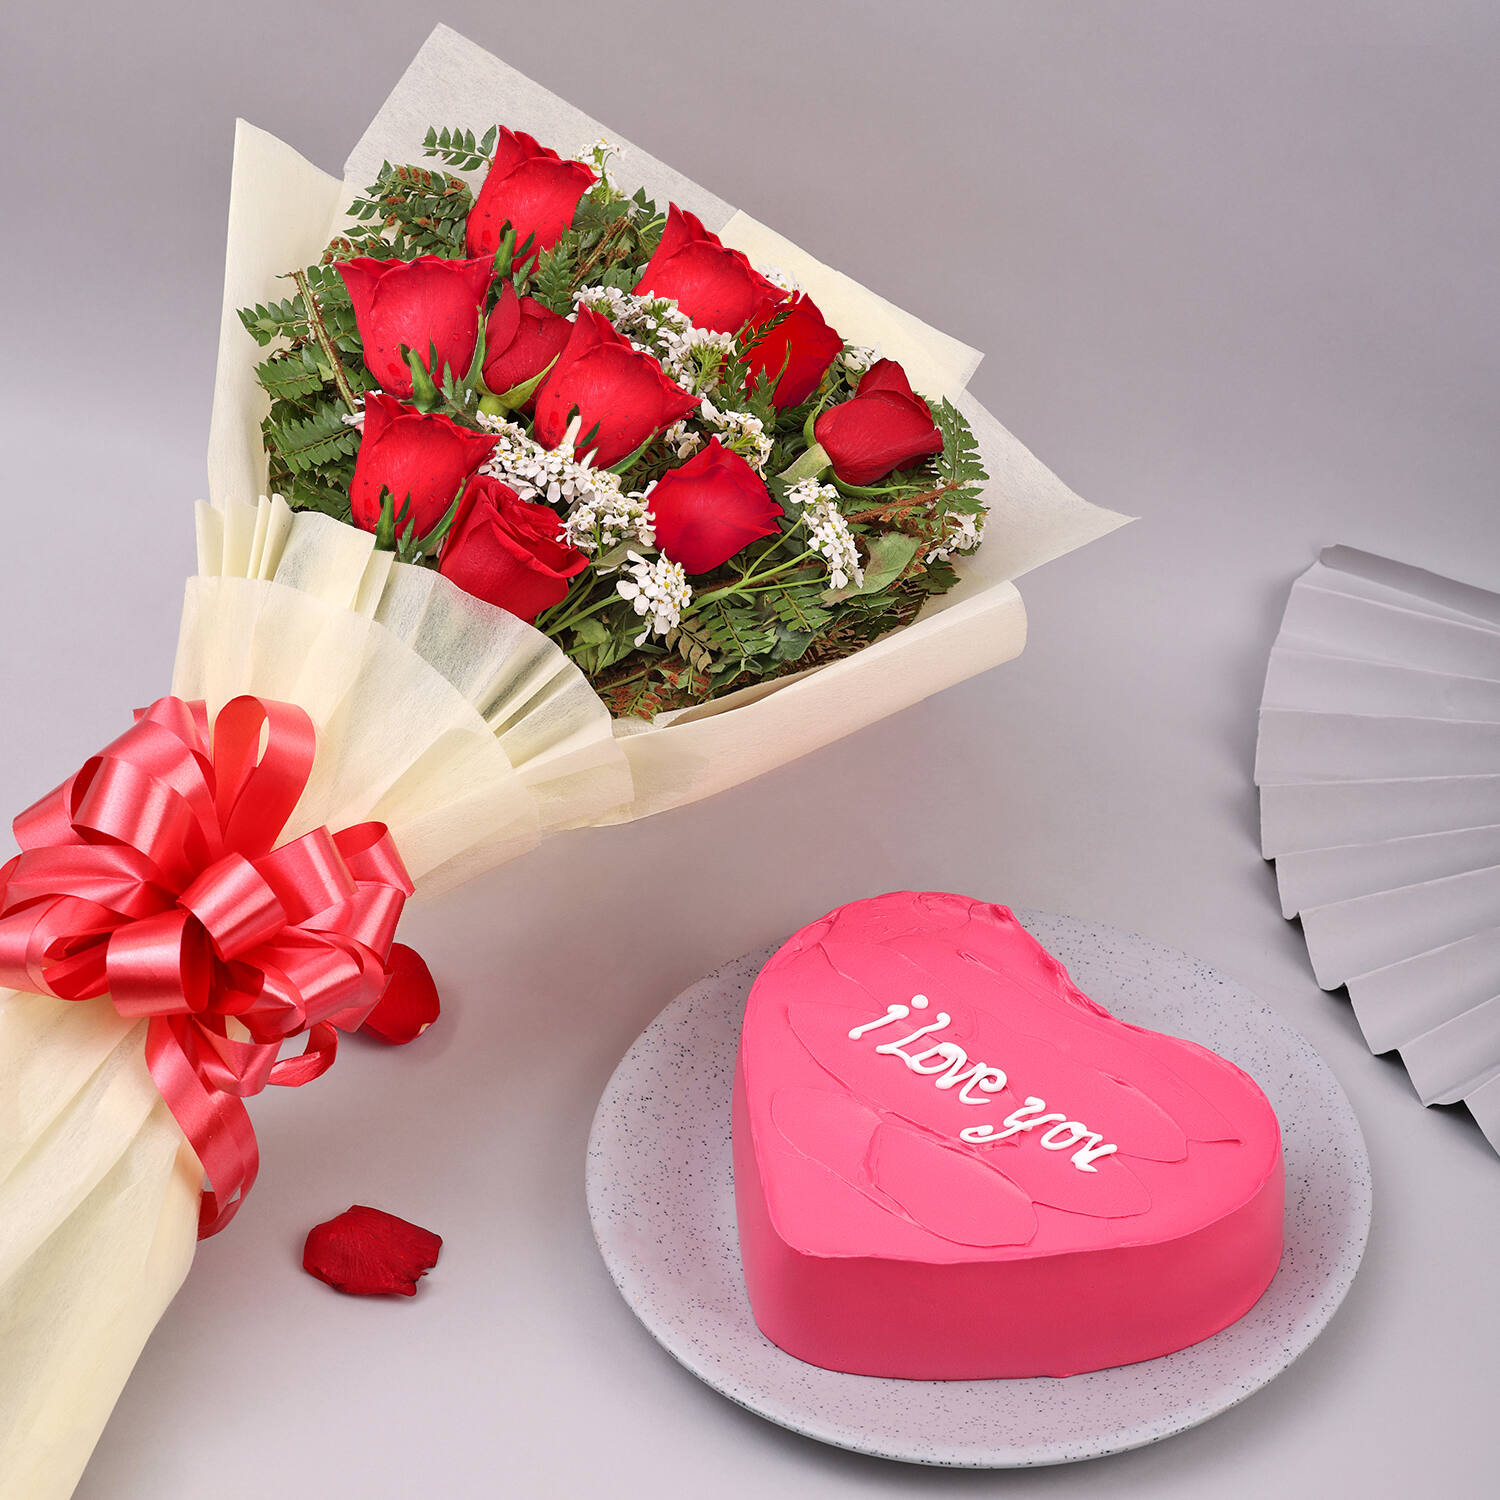 Anniversary Flower Delivery | FLORIST MALAYSIA - FLOWER DELIVERY MALAYSIA